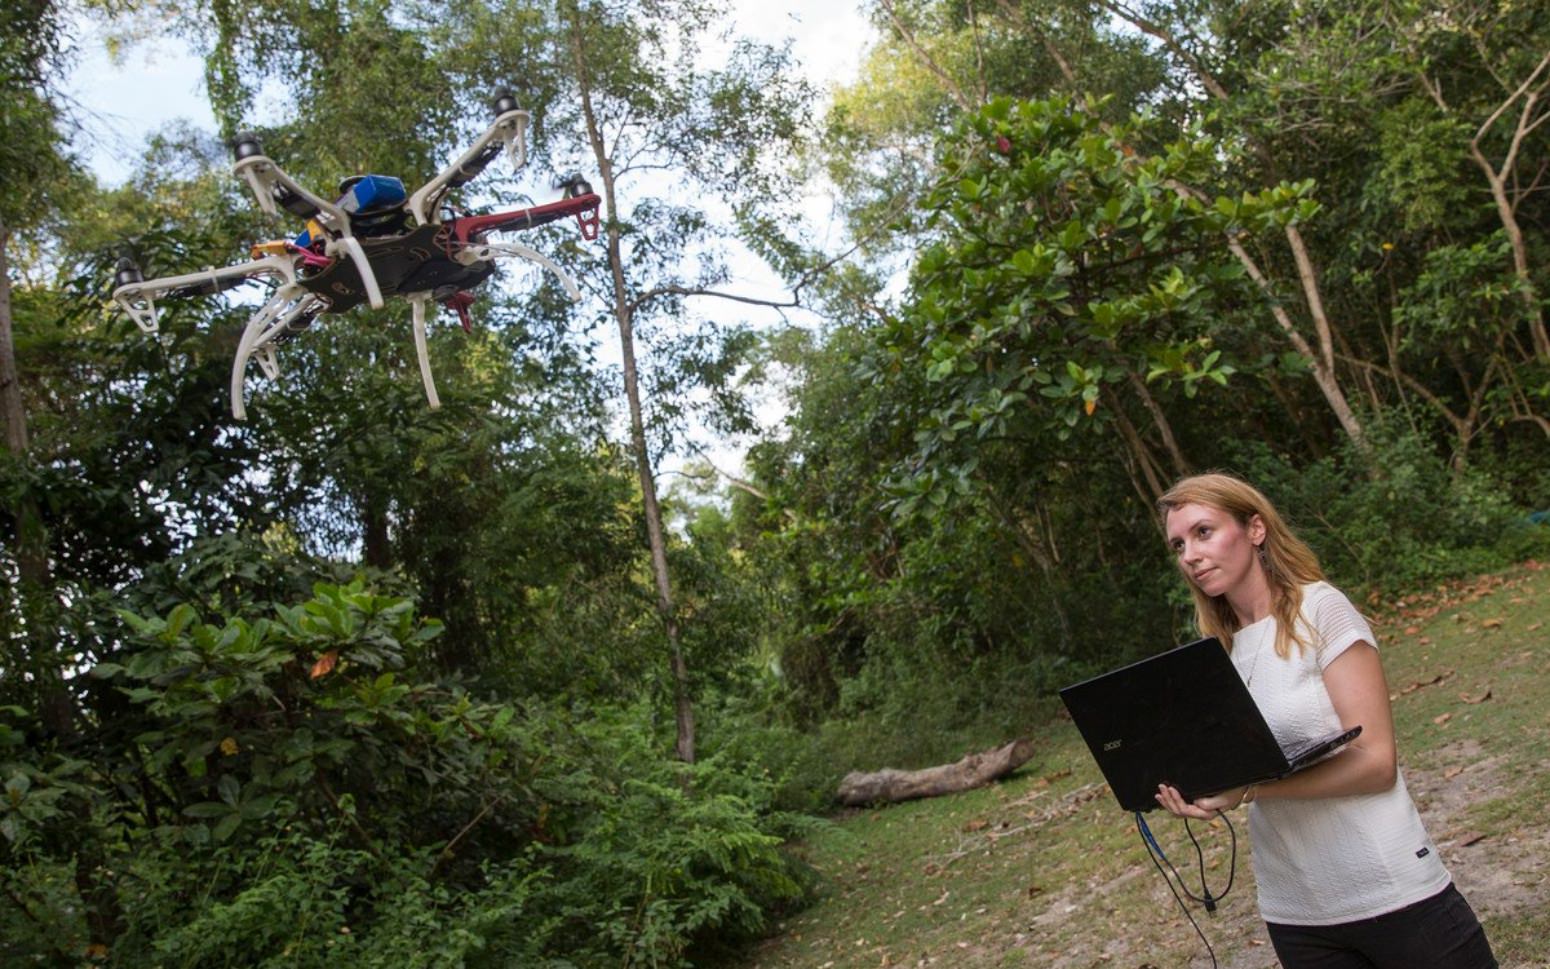 Drones are an integral part in fight against deadly malaria spread by monkeys in Malaysia